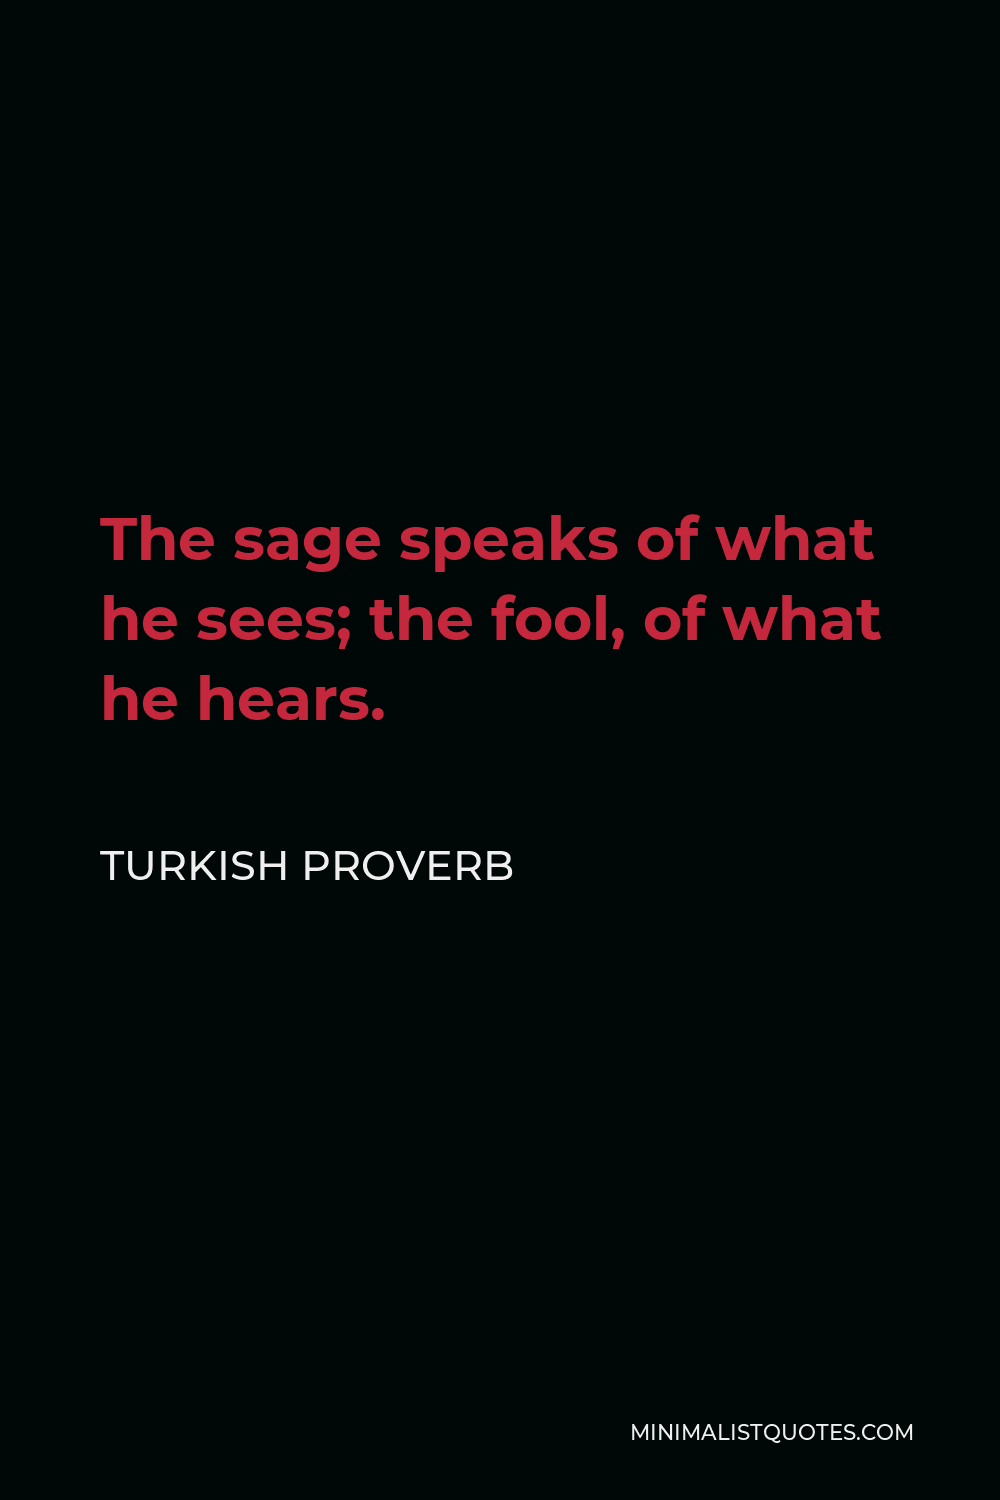 Turkish Proverb Quote - The sage speaks of what he sees; the fool, of what he hears.